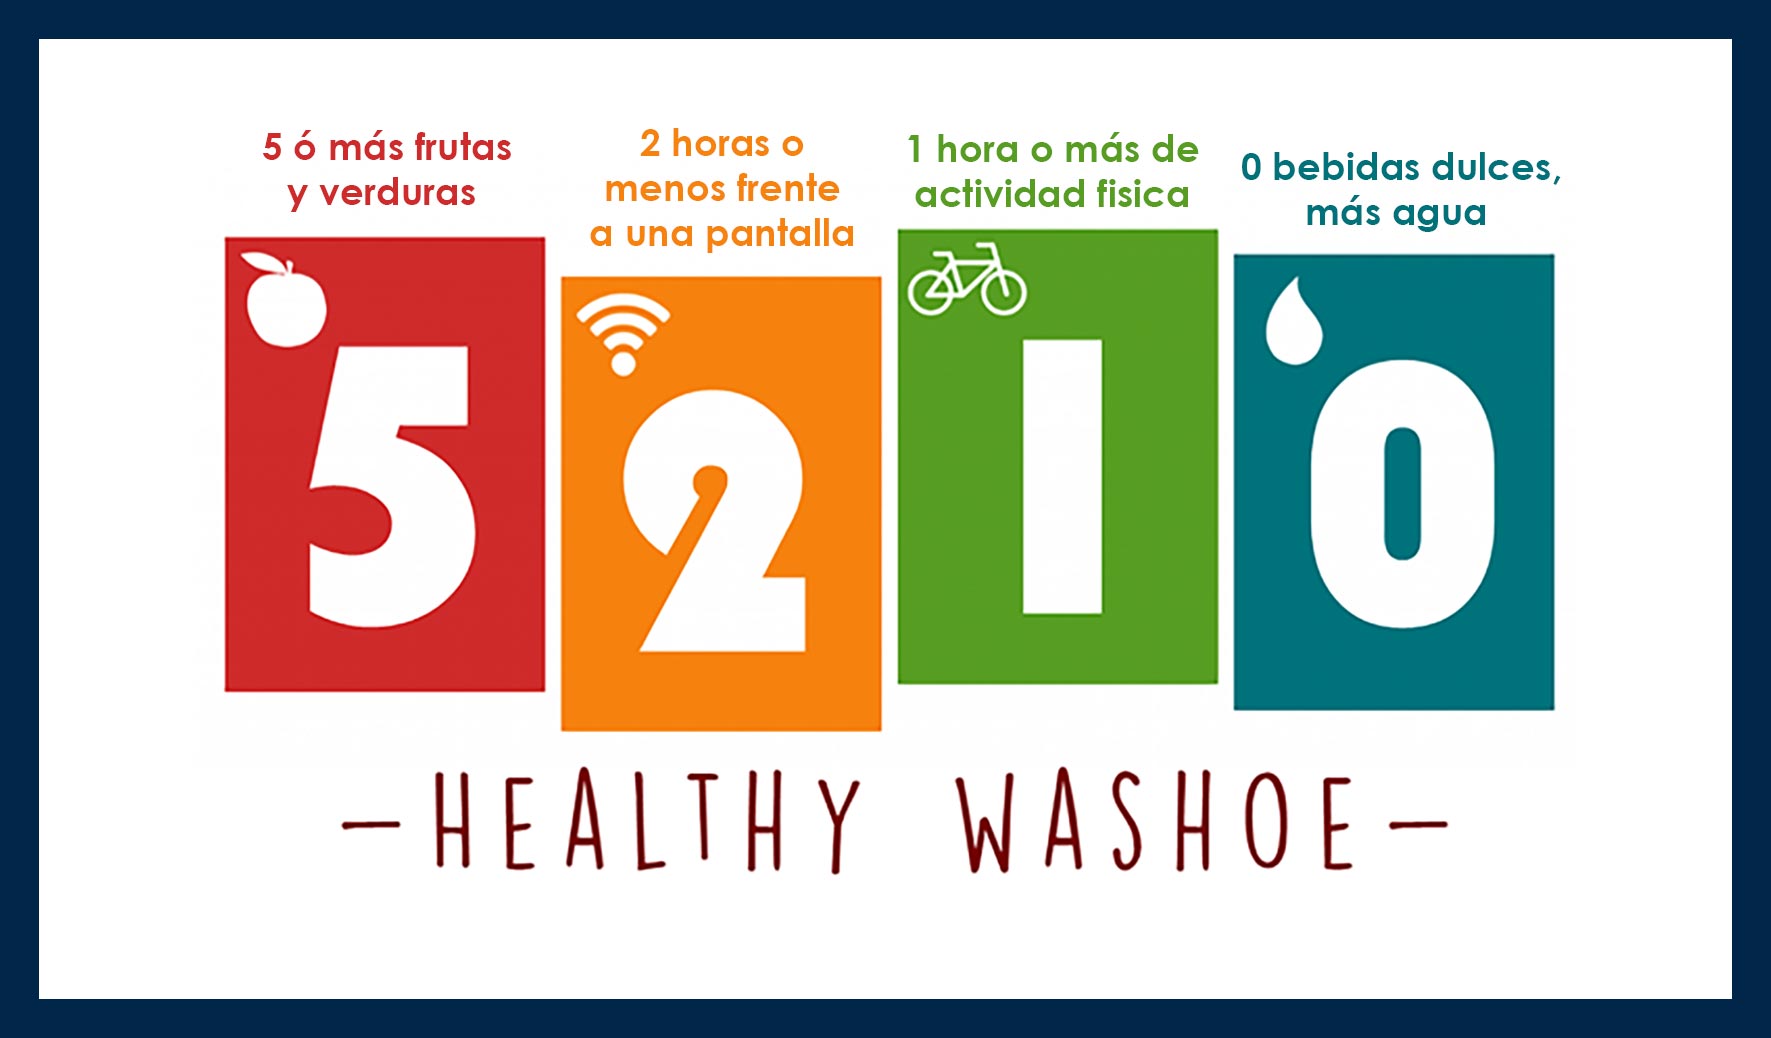 Image displays text that says 5210 Healthy Washoe with bright colors for each number.